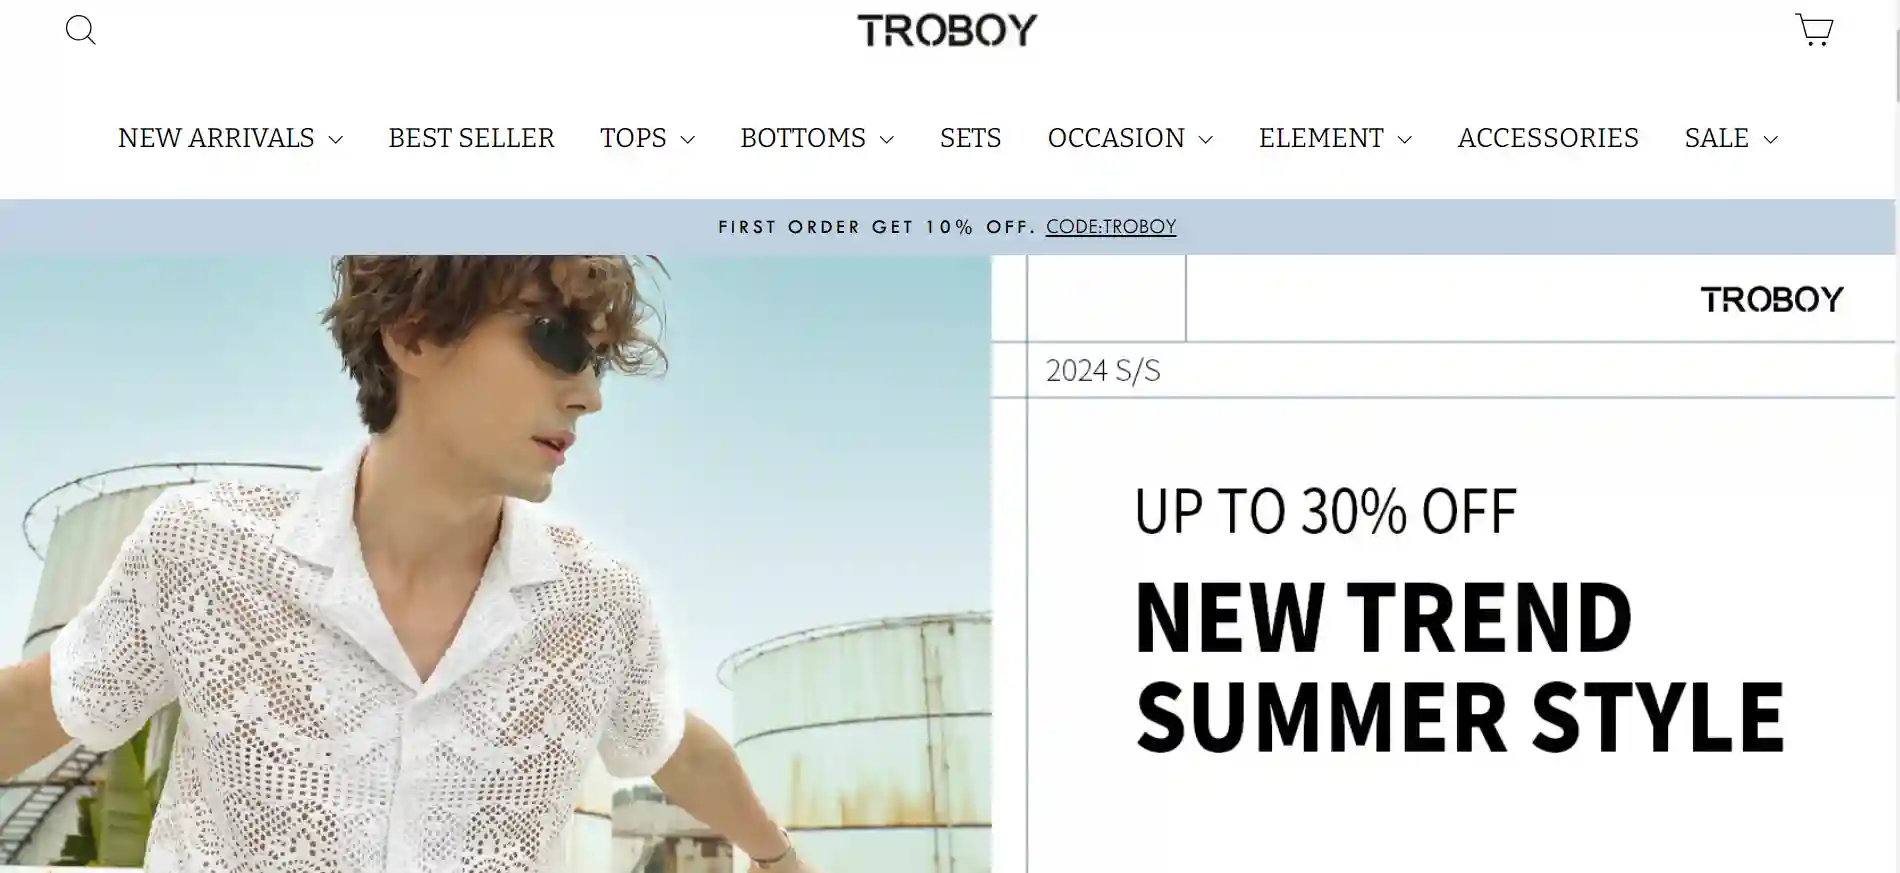 You are currently viewing Troboy Clothing Reviews: Is It a Scam or Legit?